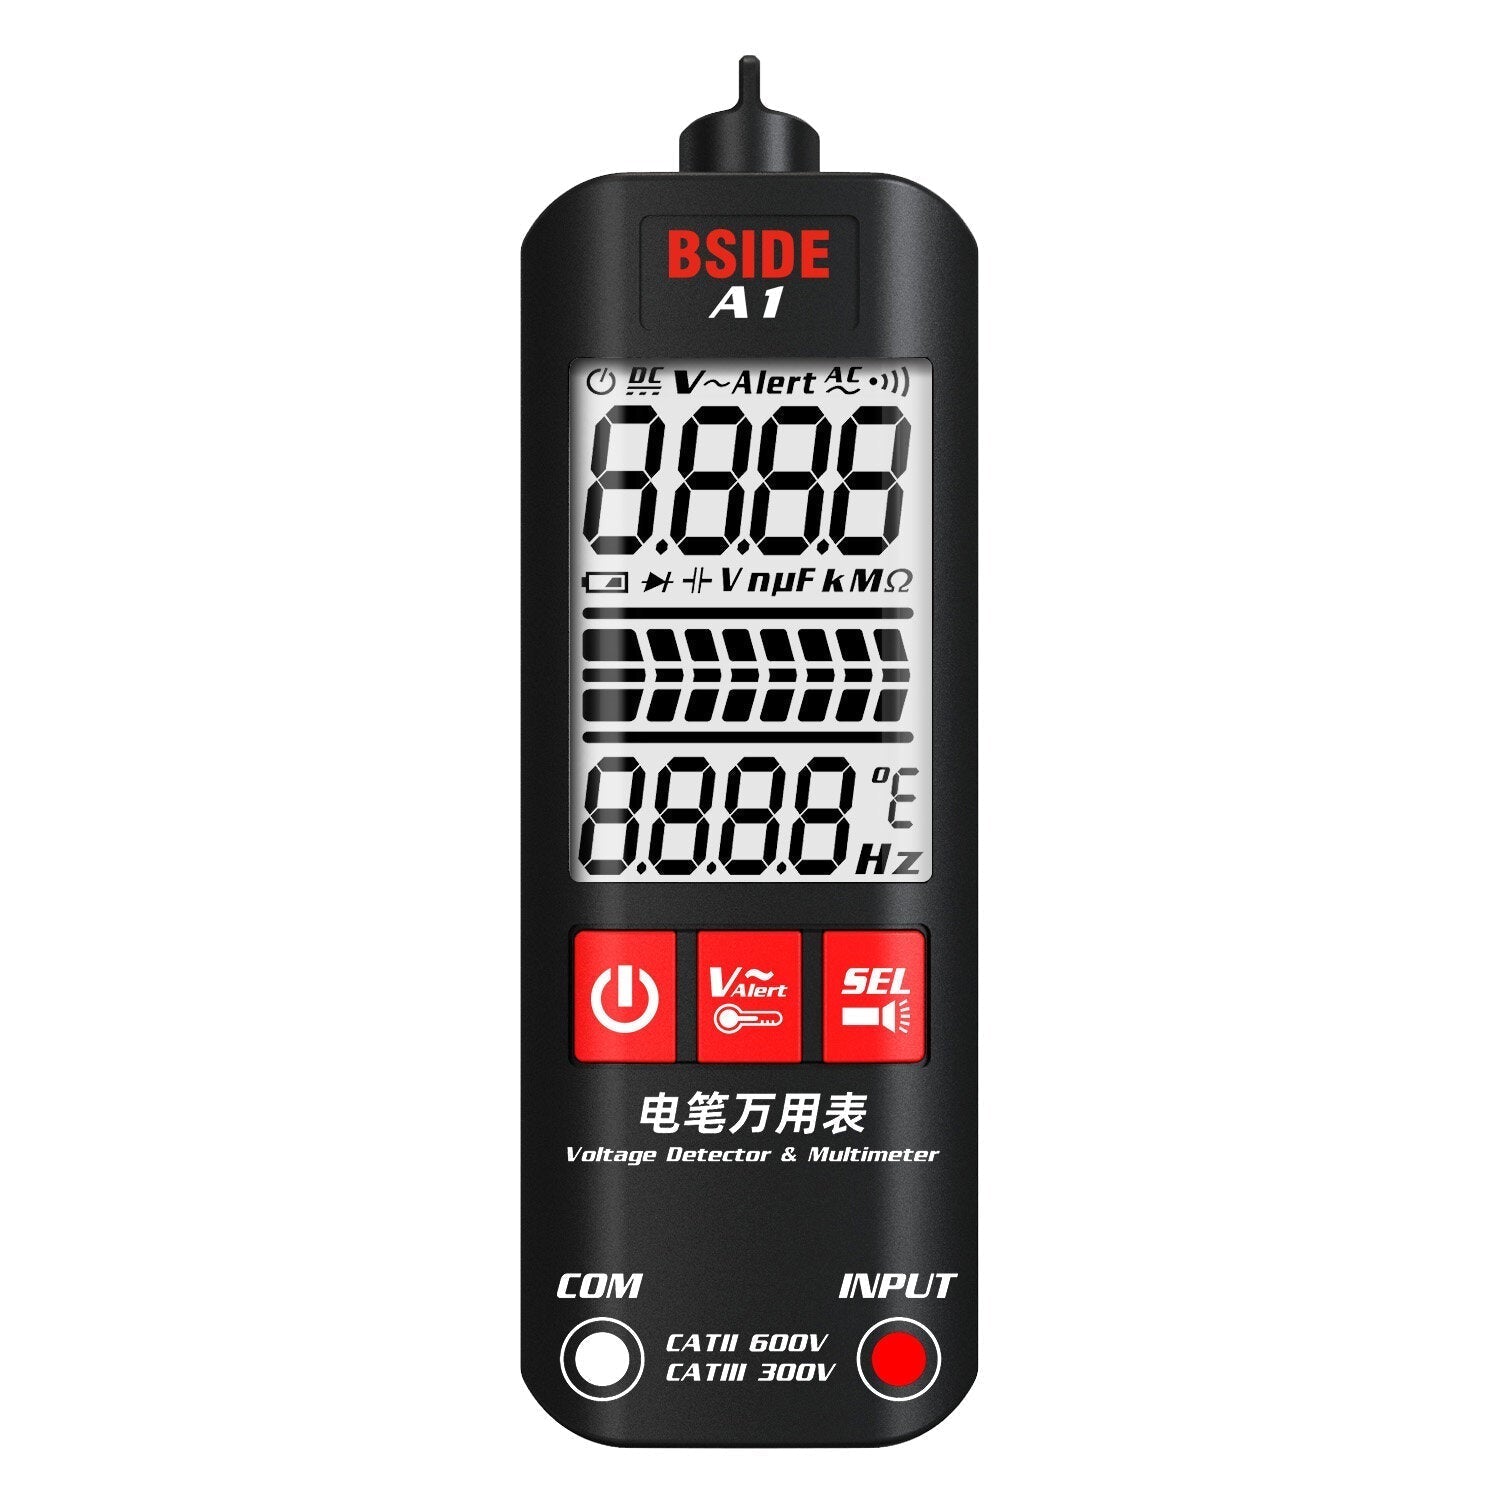 Dual-mode Smart True RMS Multimeter Non-contact AC DC Voltage Tester with Flashlight